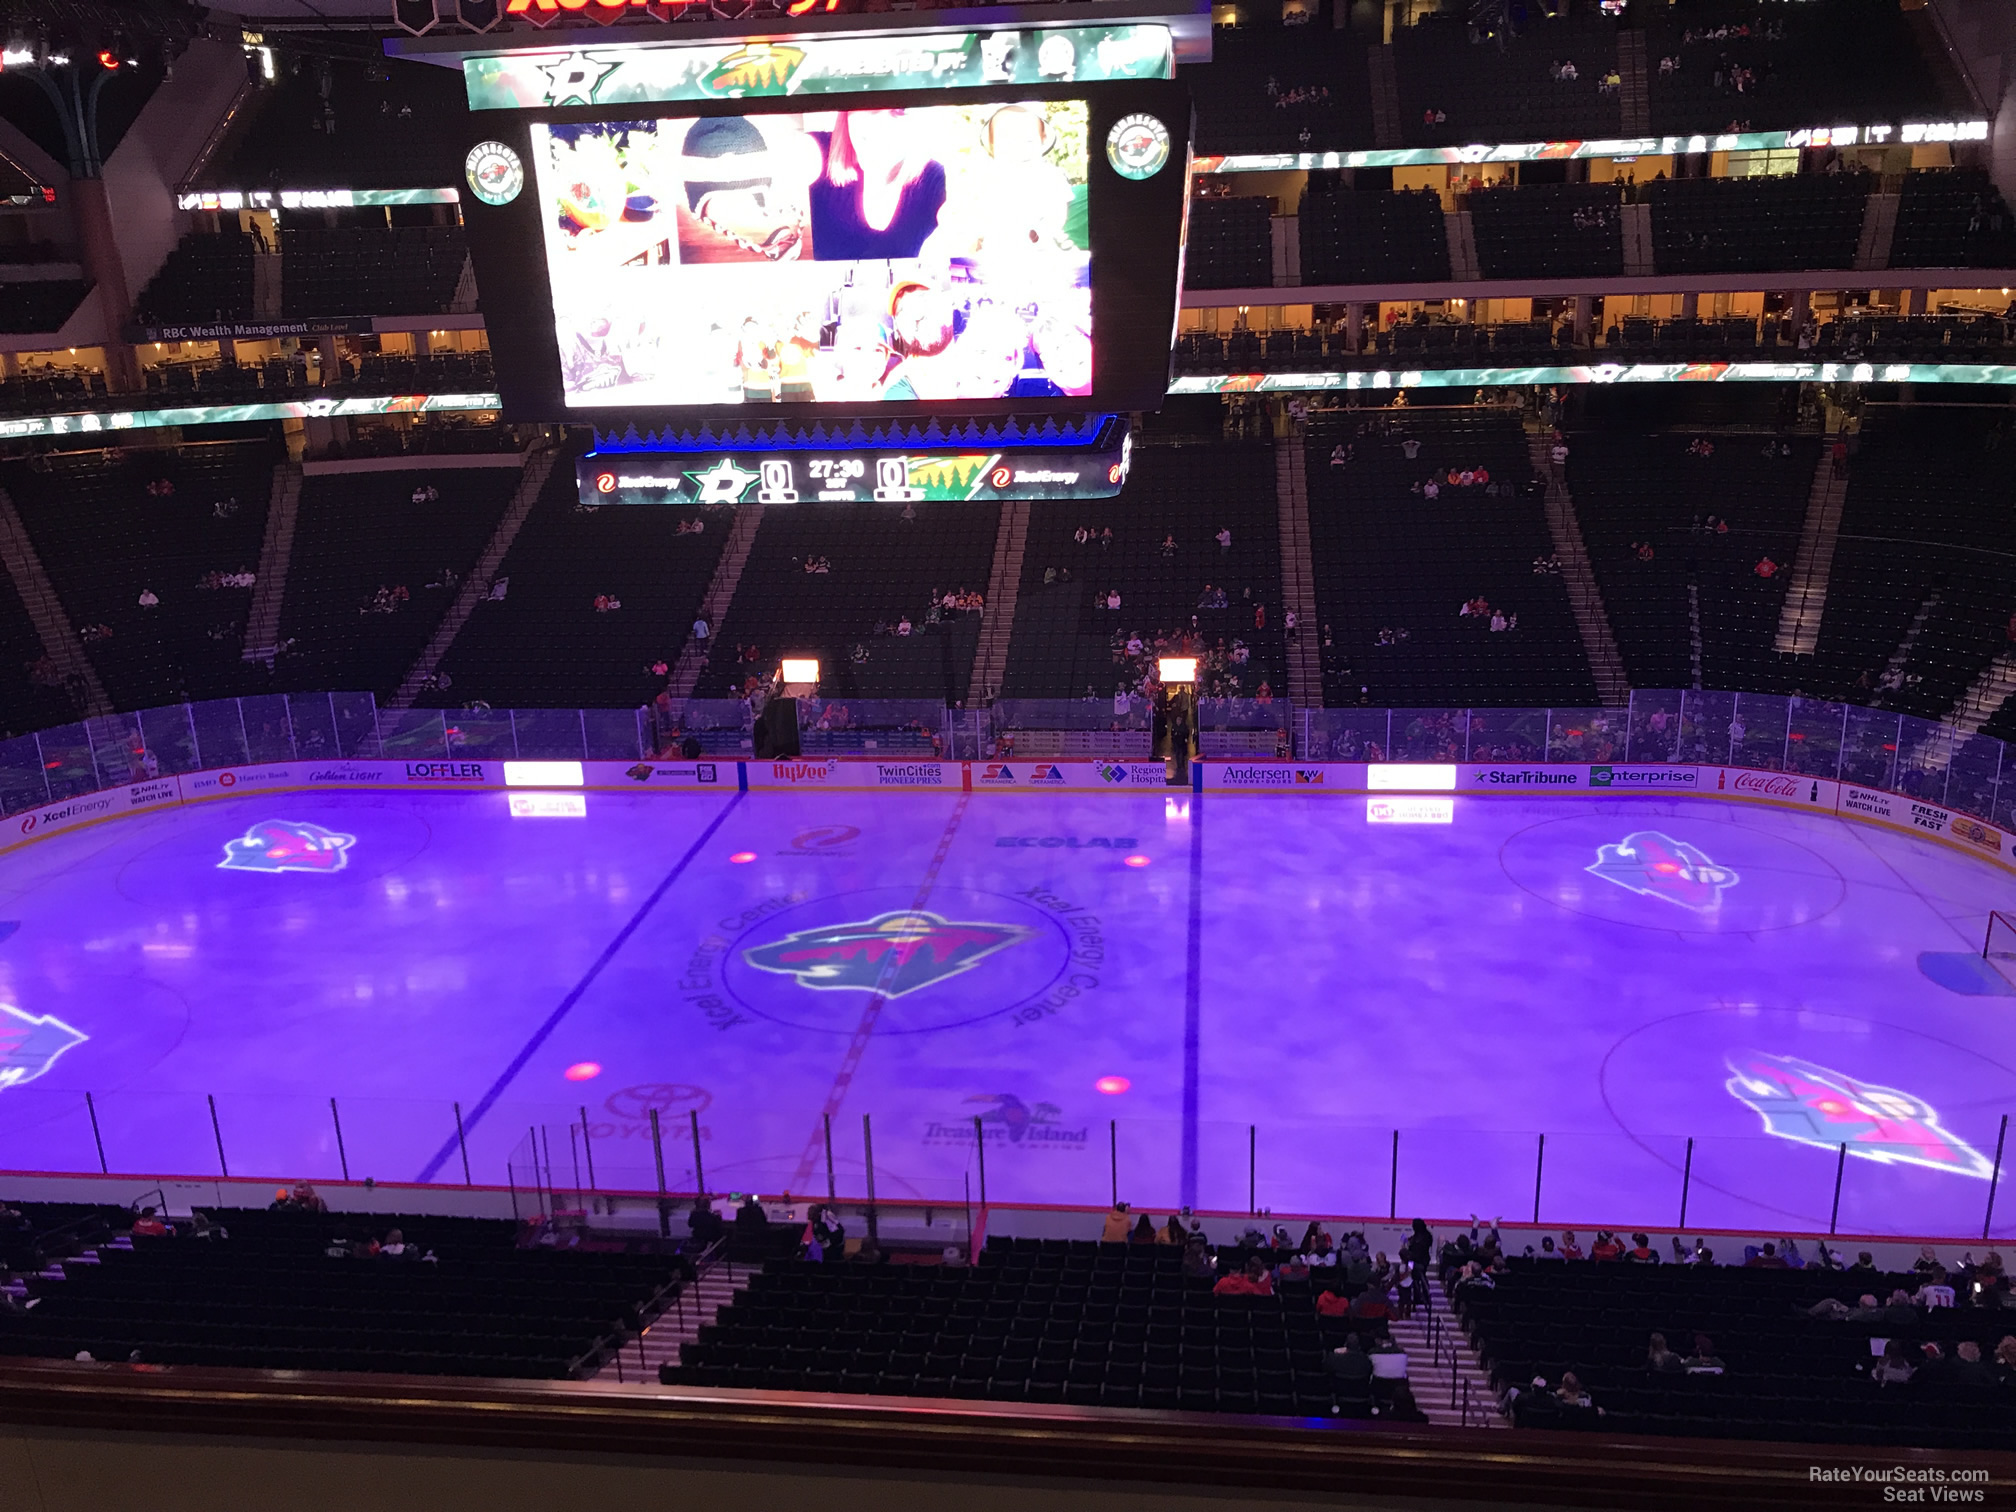 section c5, row 5 seat view  for hockey - xcel energy center